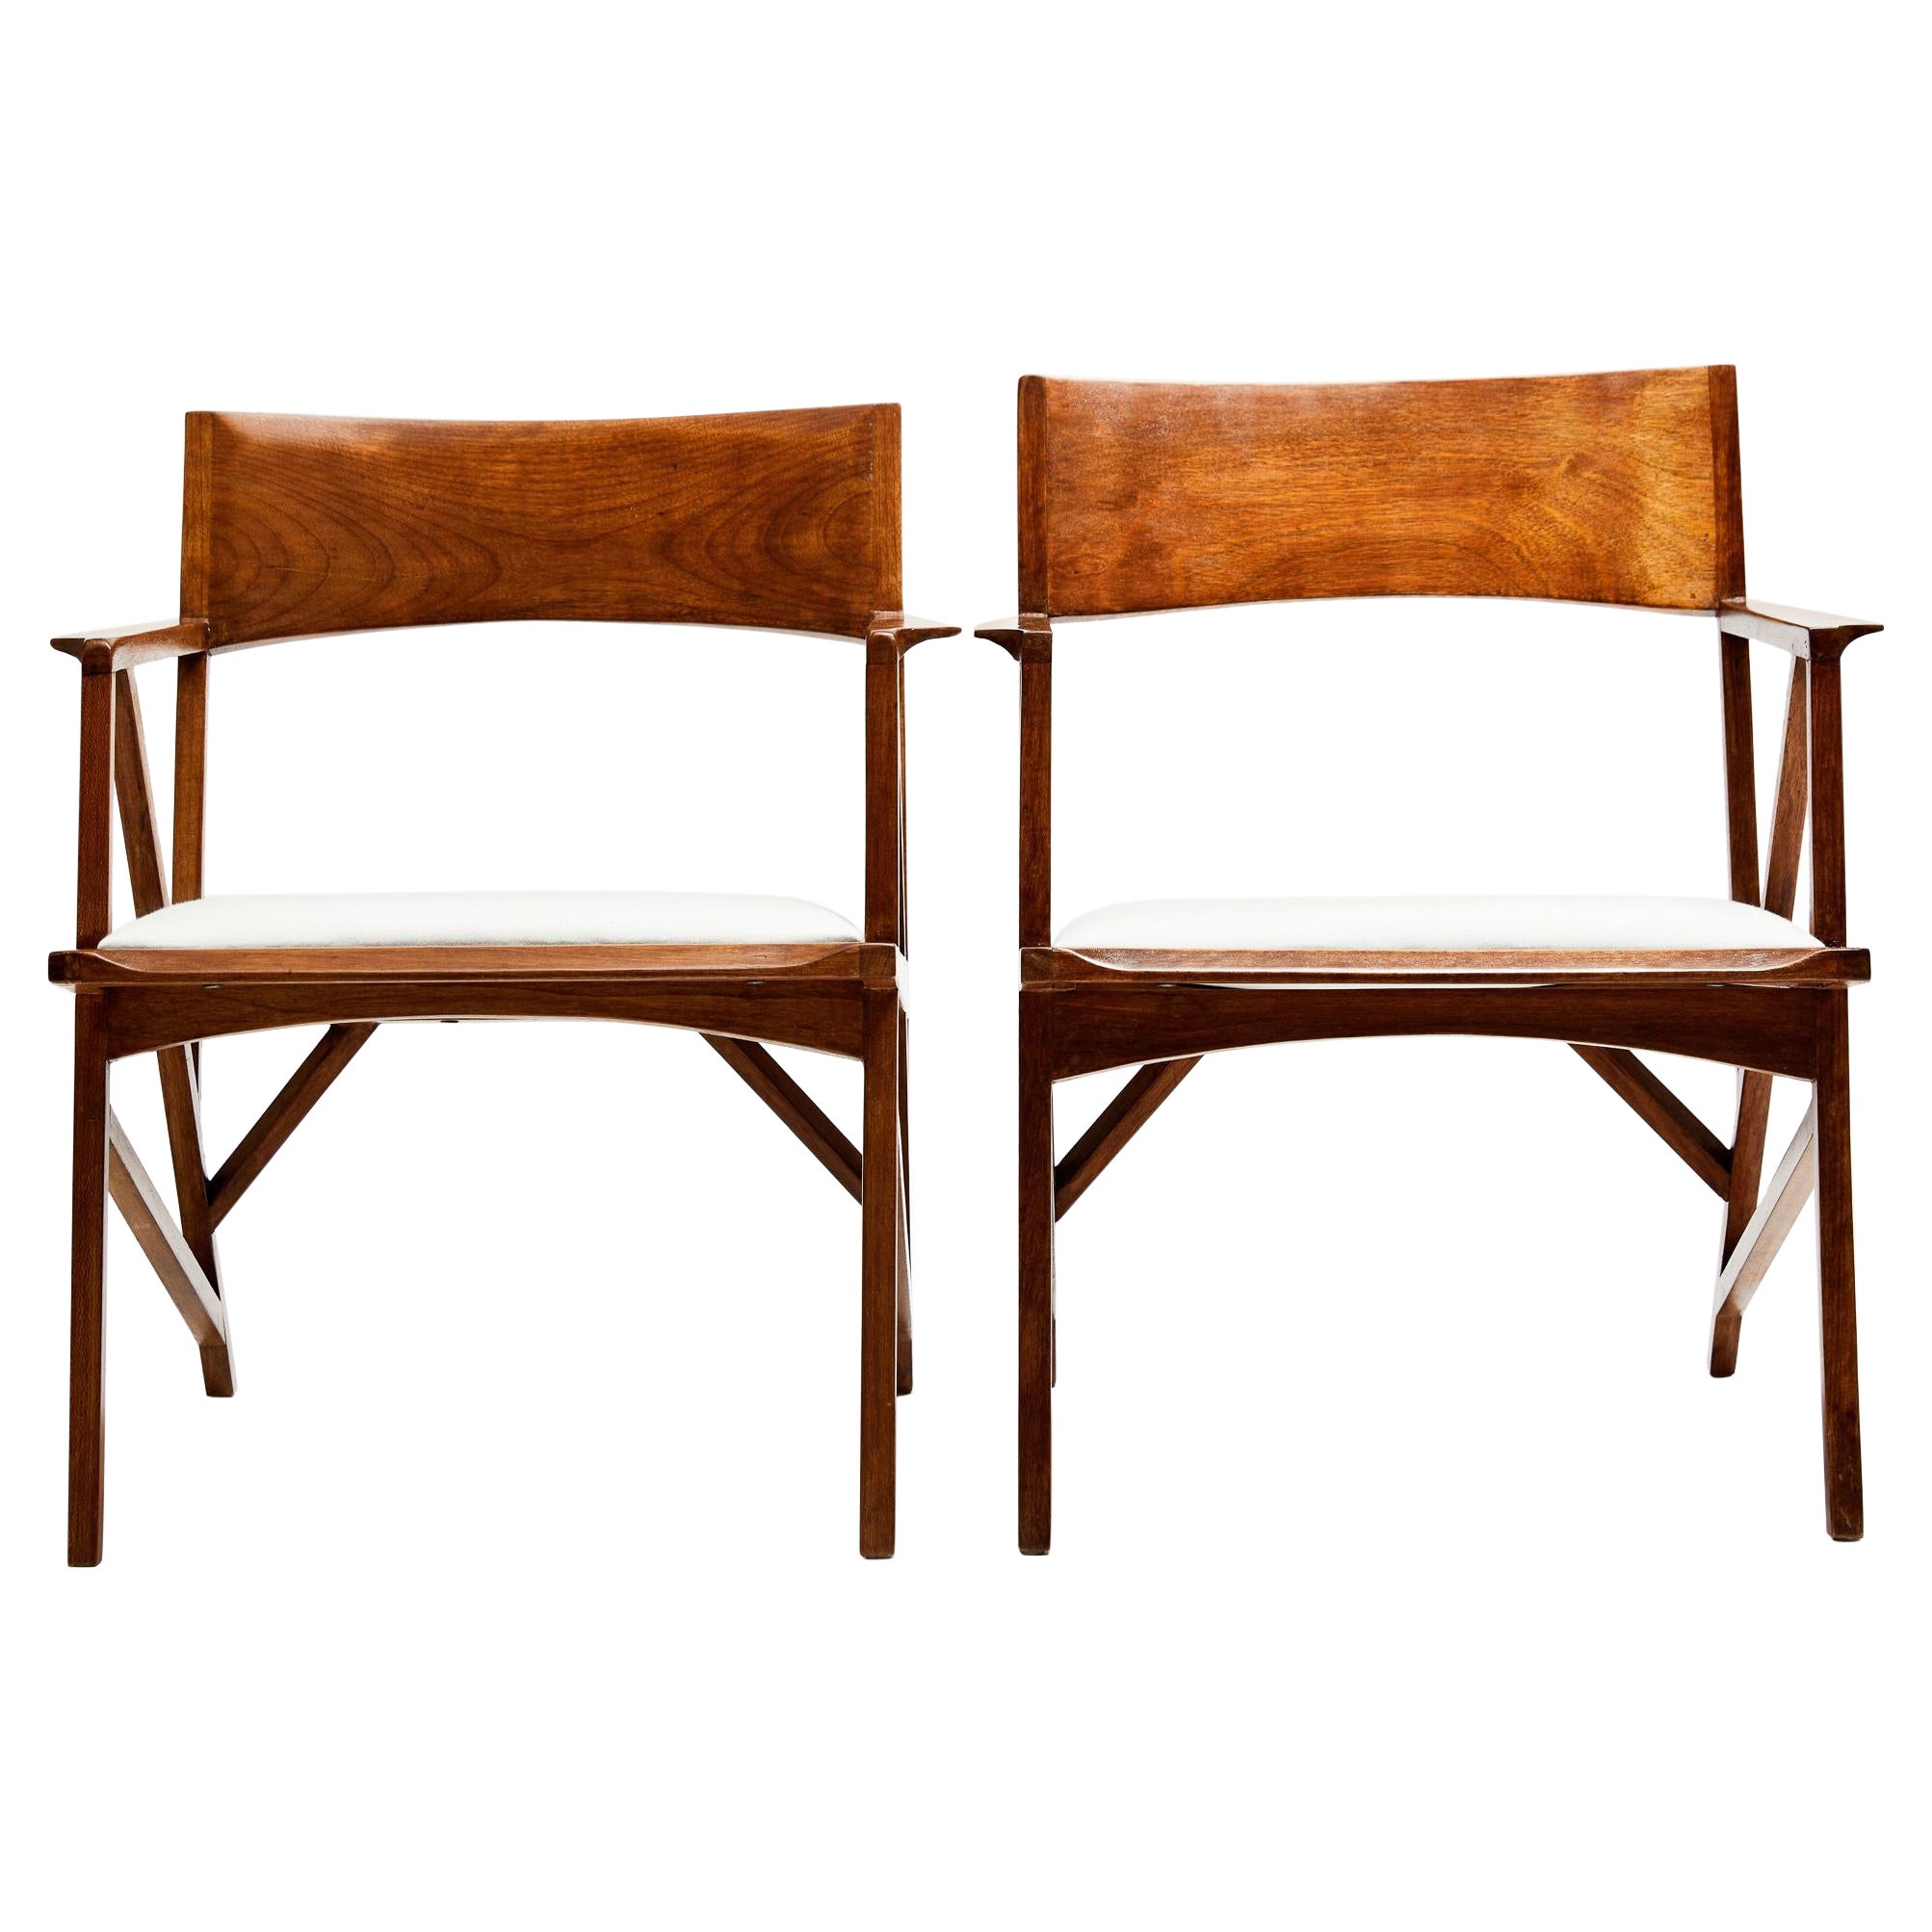 Available now, this architectural pair of modern beauties won first prize of Design Museu da Casa Brasilera in 2009 and an alternative wood award at the Salao Movel, also being part of the collection of chairs at the Museu das Cadeiras Brasileiras.